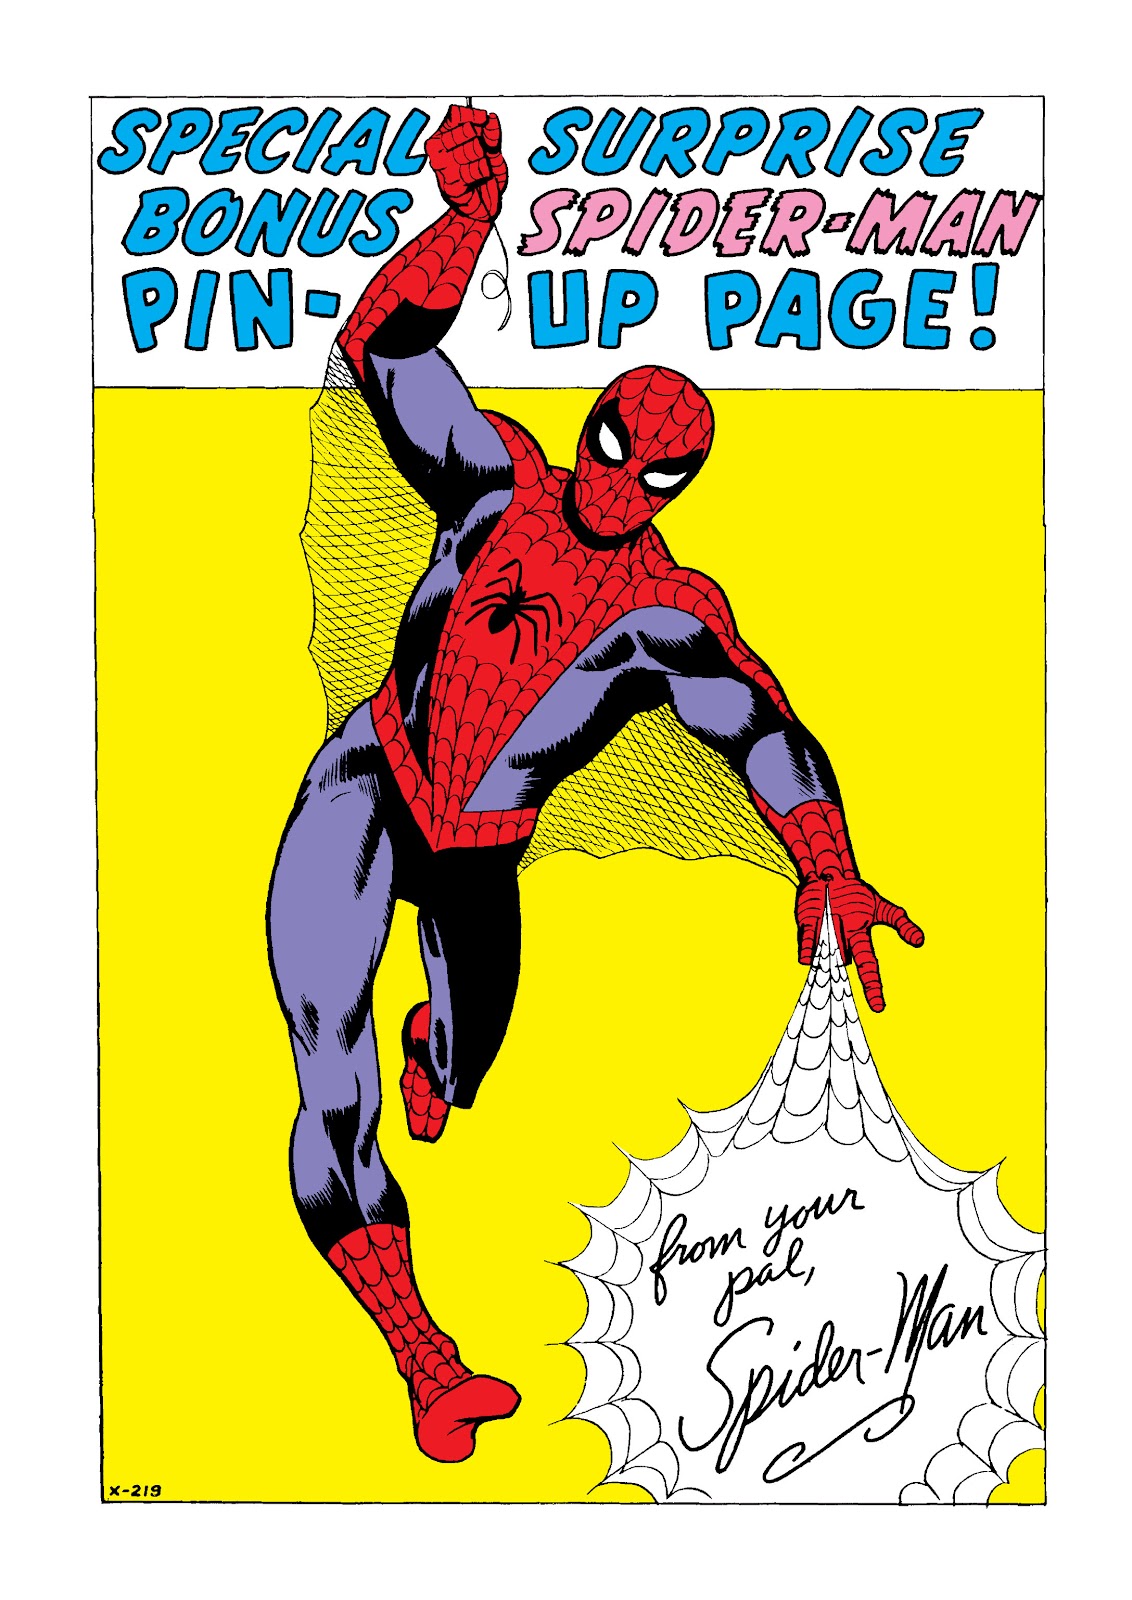 The Amazing Spider Man 1963 Issue 3 Read The Amazing Spider Man 1963